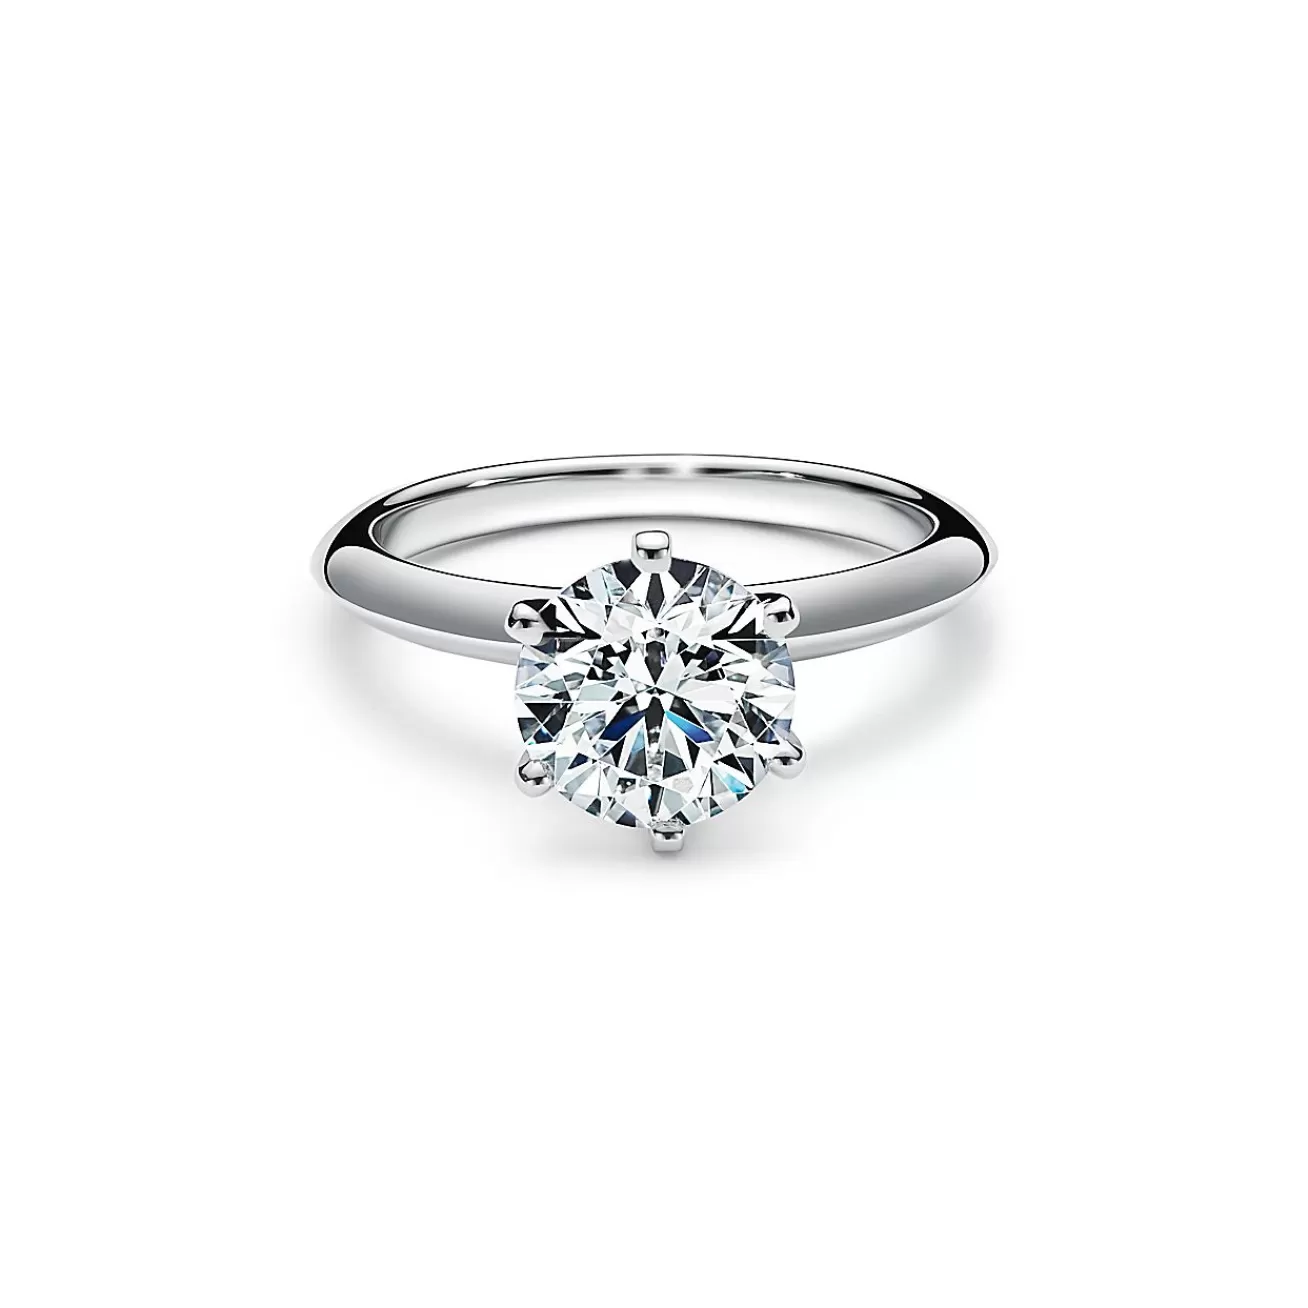 Tiffany & Co. The Tiffany® Setting in platinum: world's most iconic engagement ring. | ^ Engagement Rings